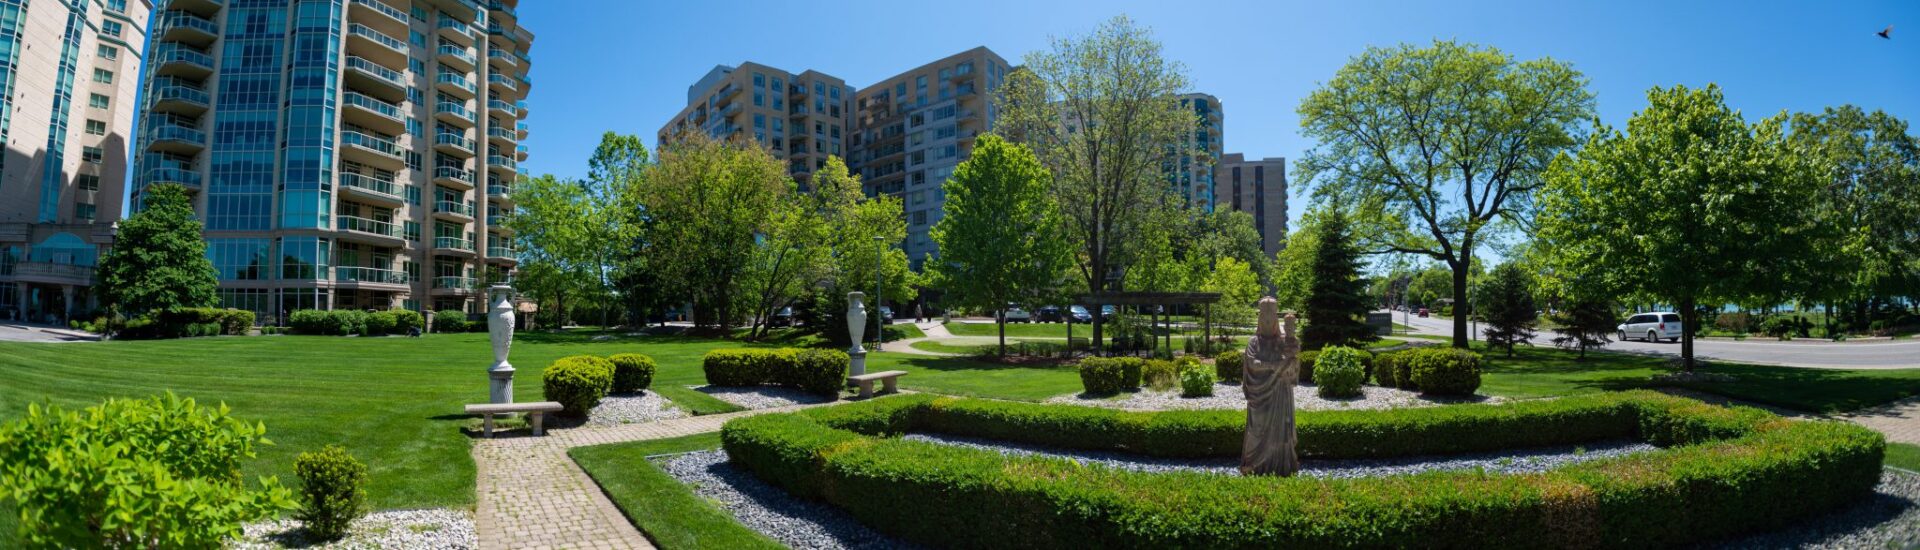 A panoramic view of an urban park with green grass, hedges, trees, sculptures, benches, and surrounding high-rise buildings on a clear day.